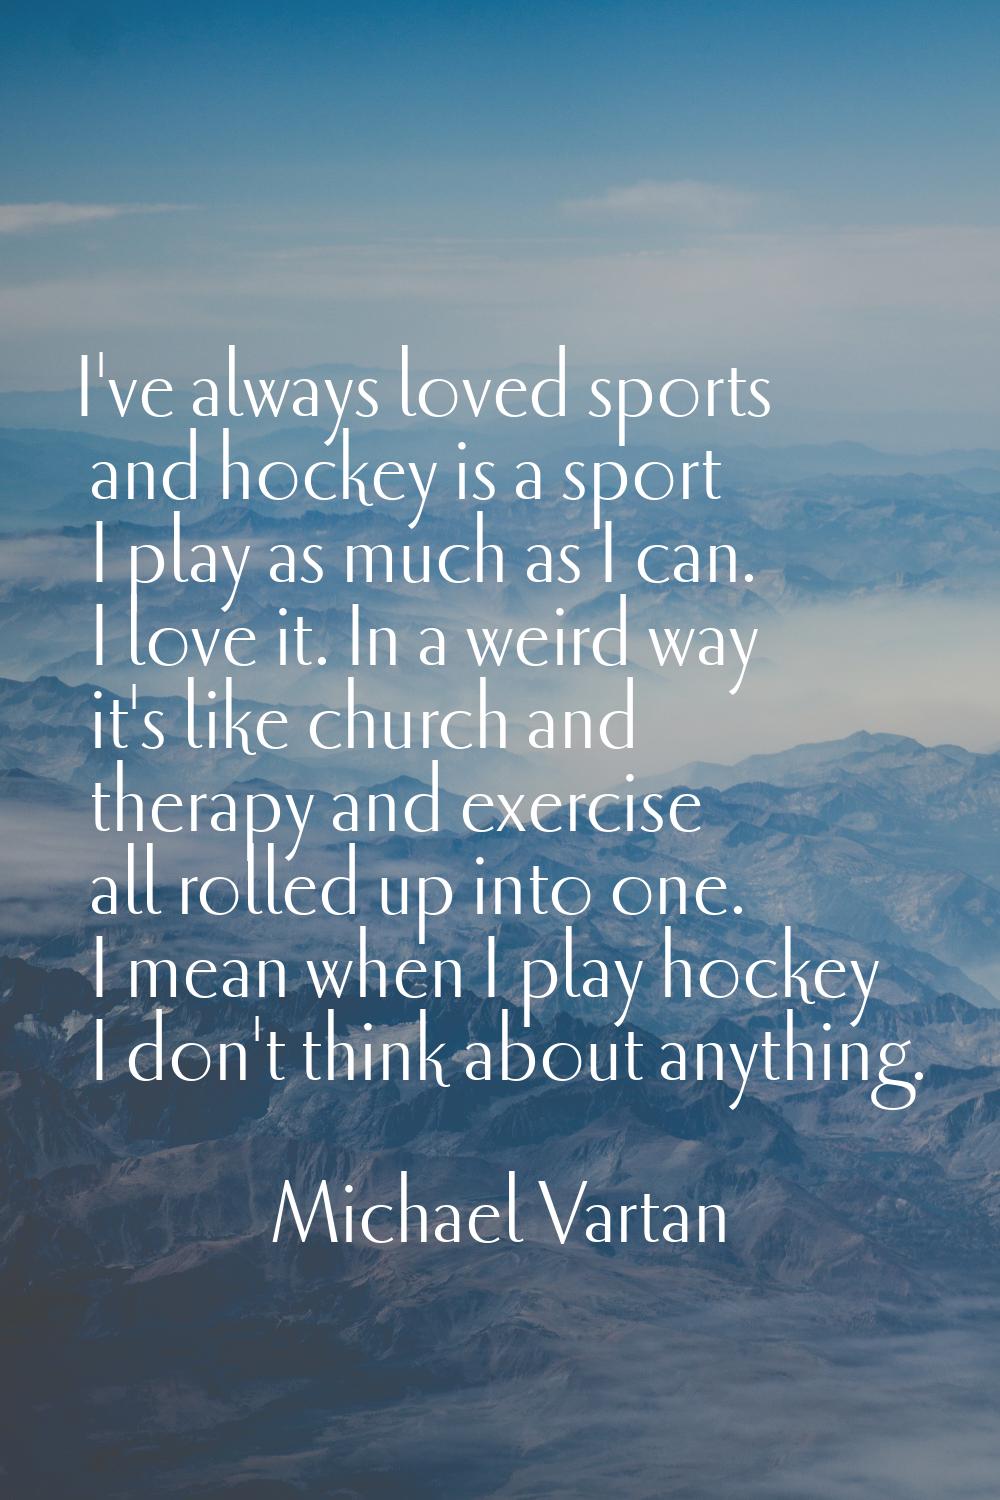 I've always loved sports and hockey is a sport I play as much as I can. I love it. In a weird way i